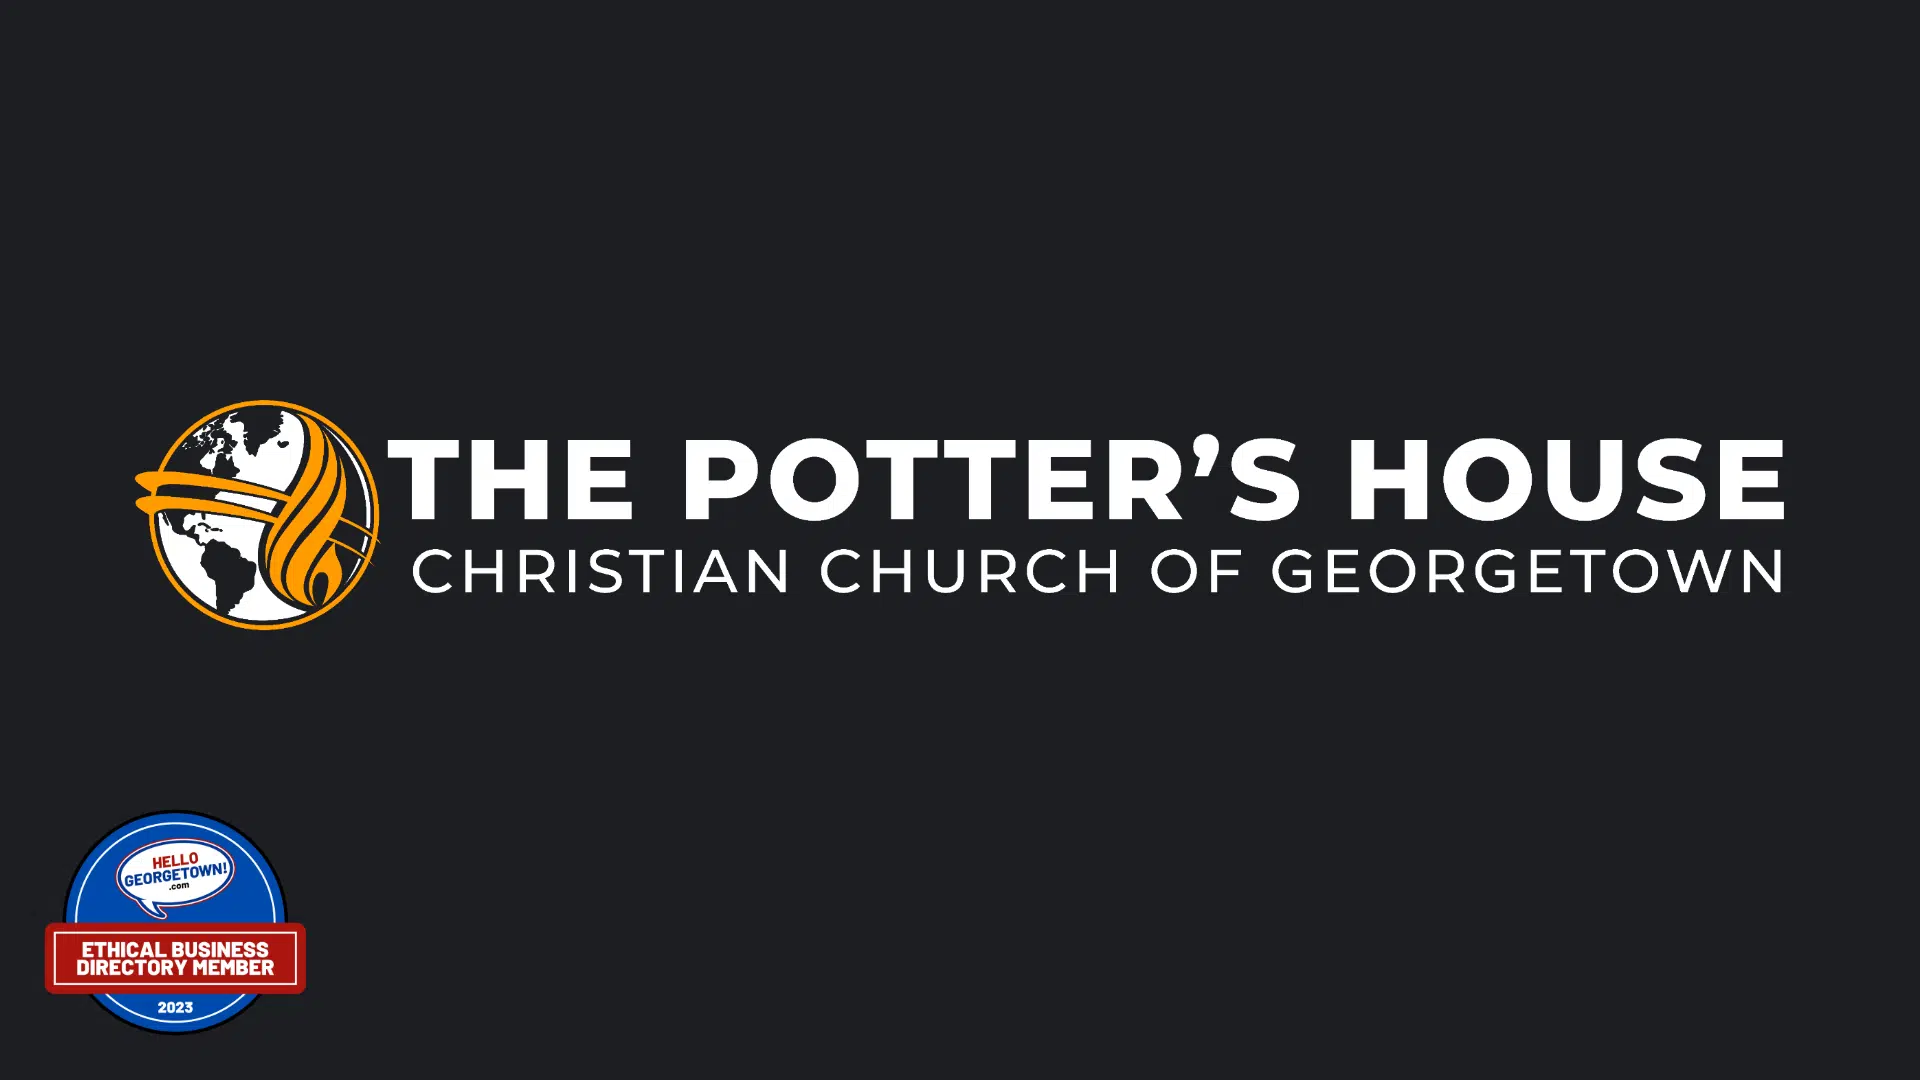 The Potter's House Church